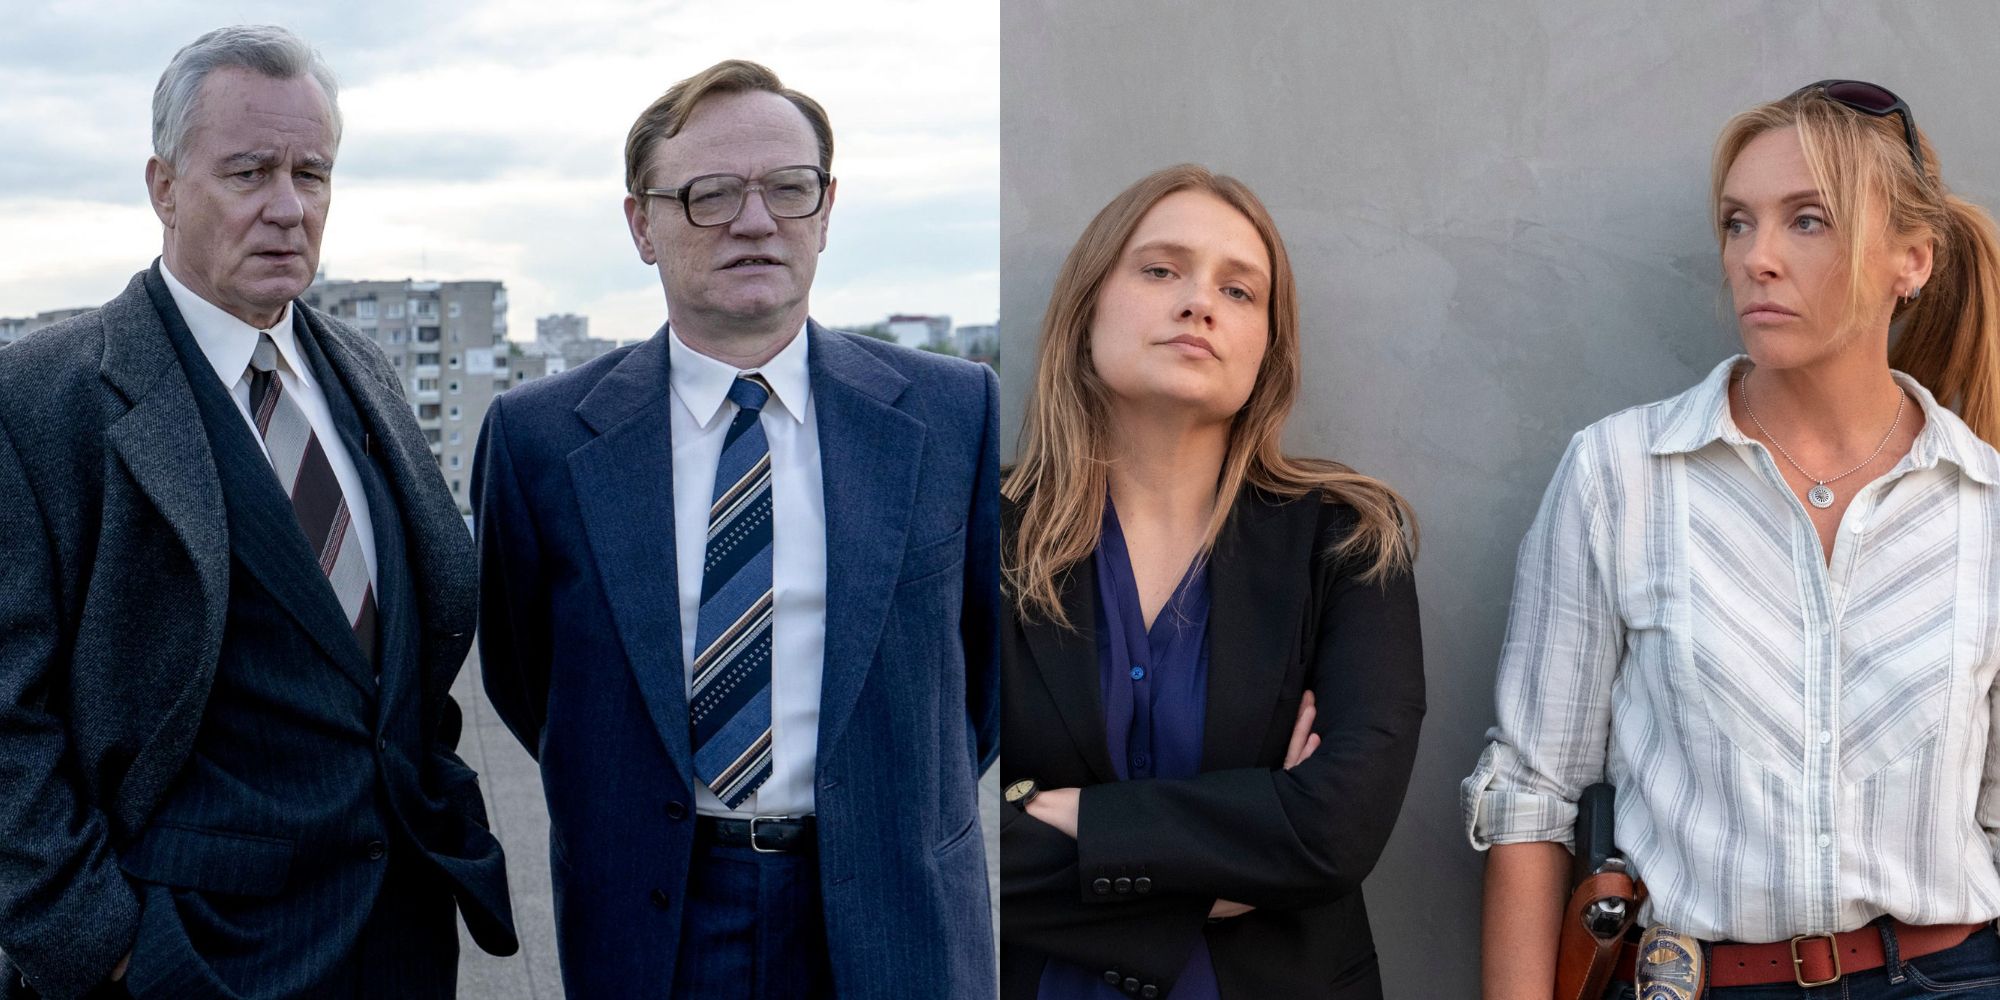 Split image showing characters from Chernobyl and Unbelievable.